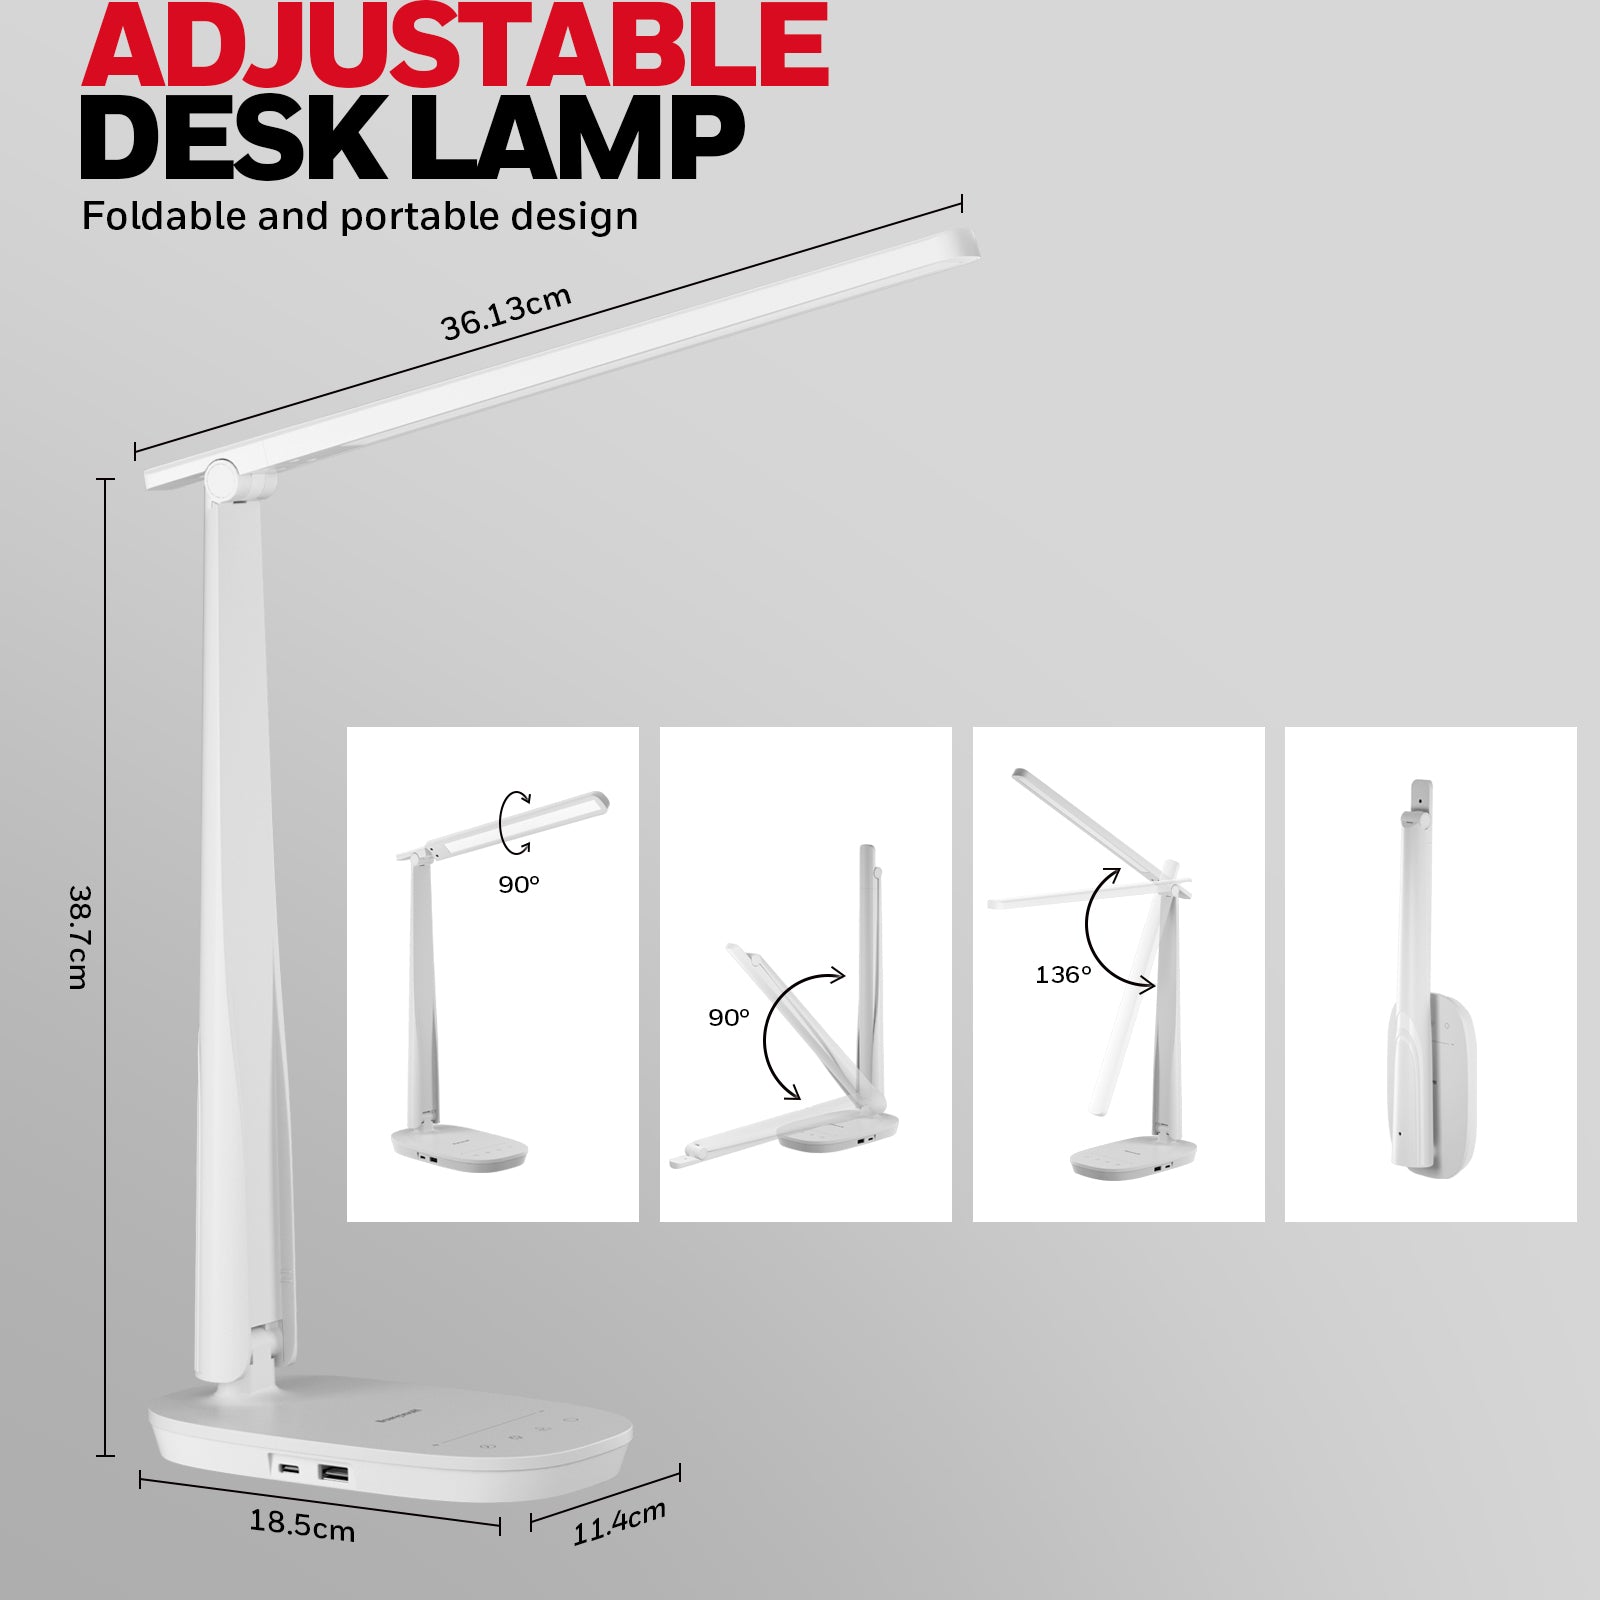 Honeywell Desk Lamp with USB Charging Port - Sunturalux™ H2 Dimmable Eye Caring LED Table Lamp